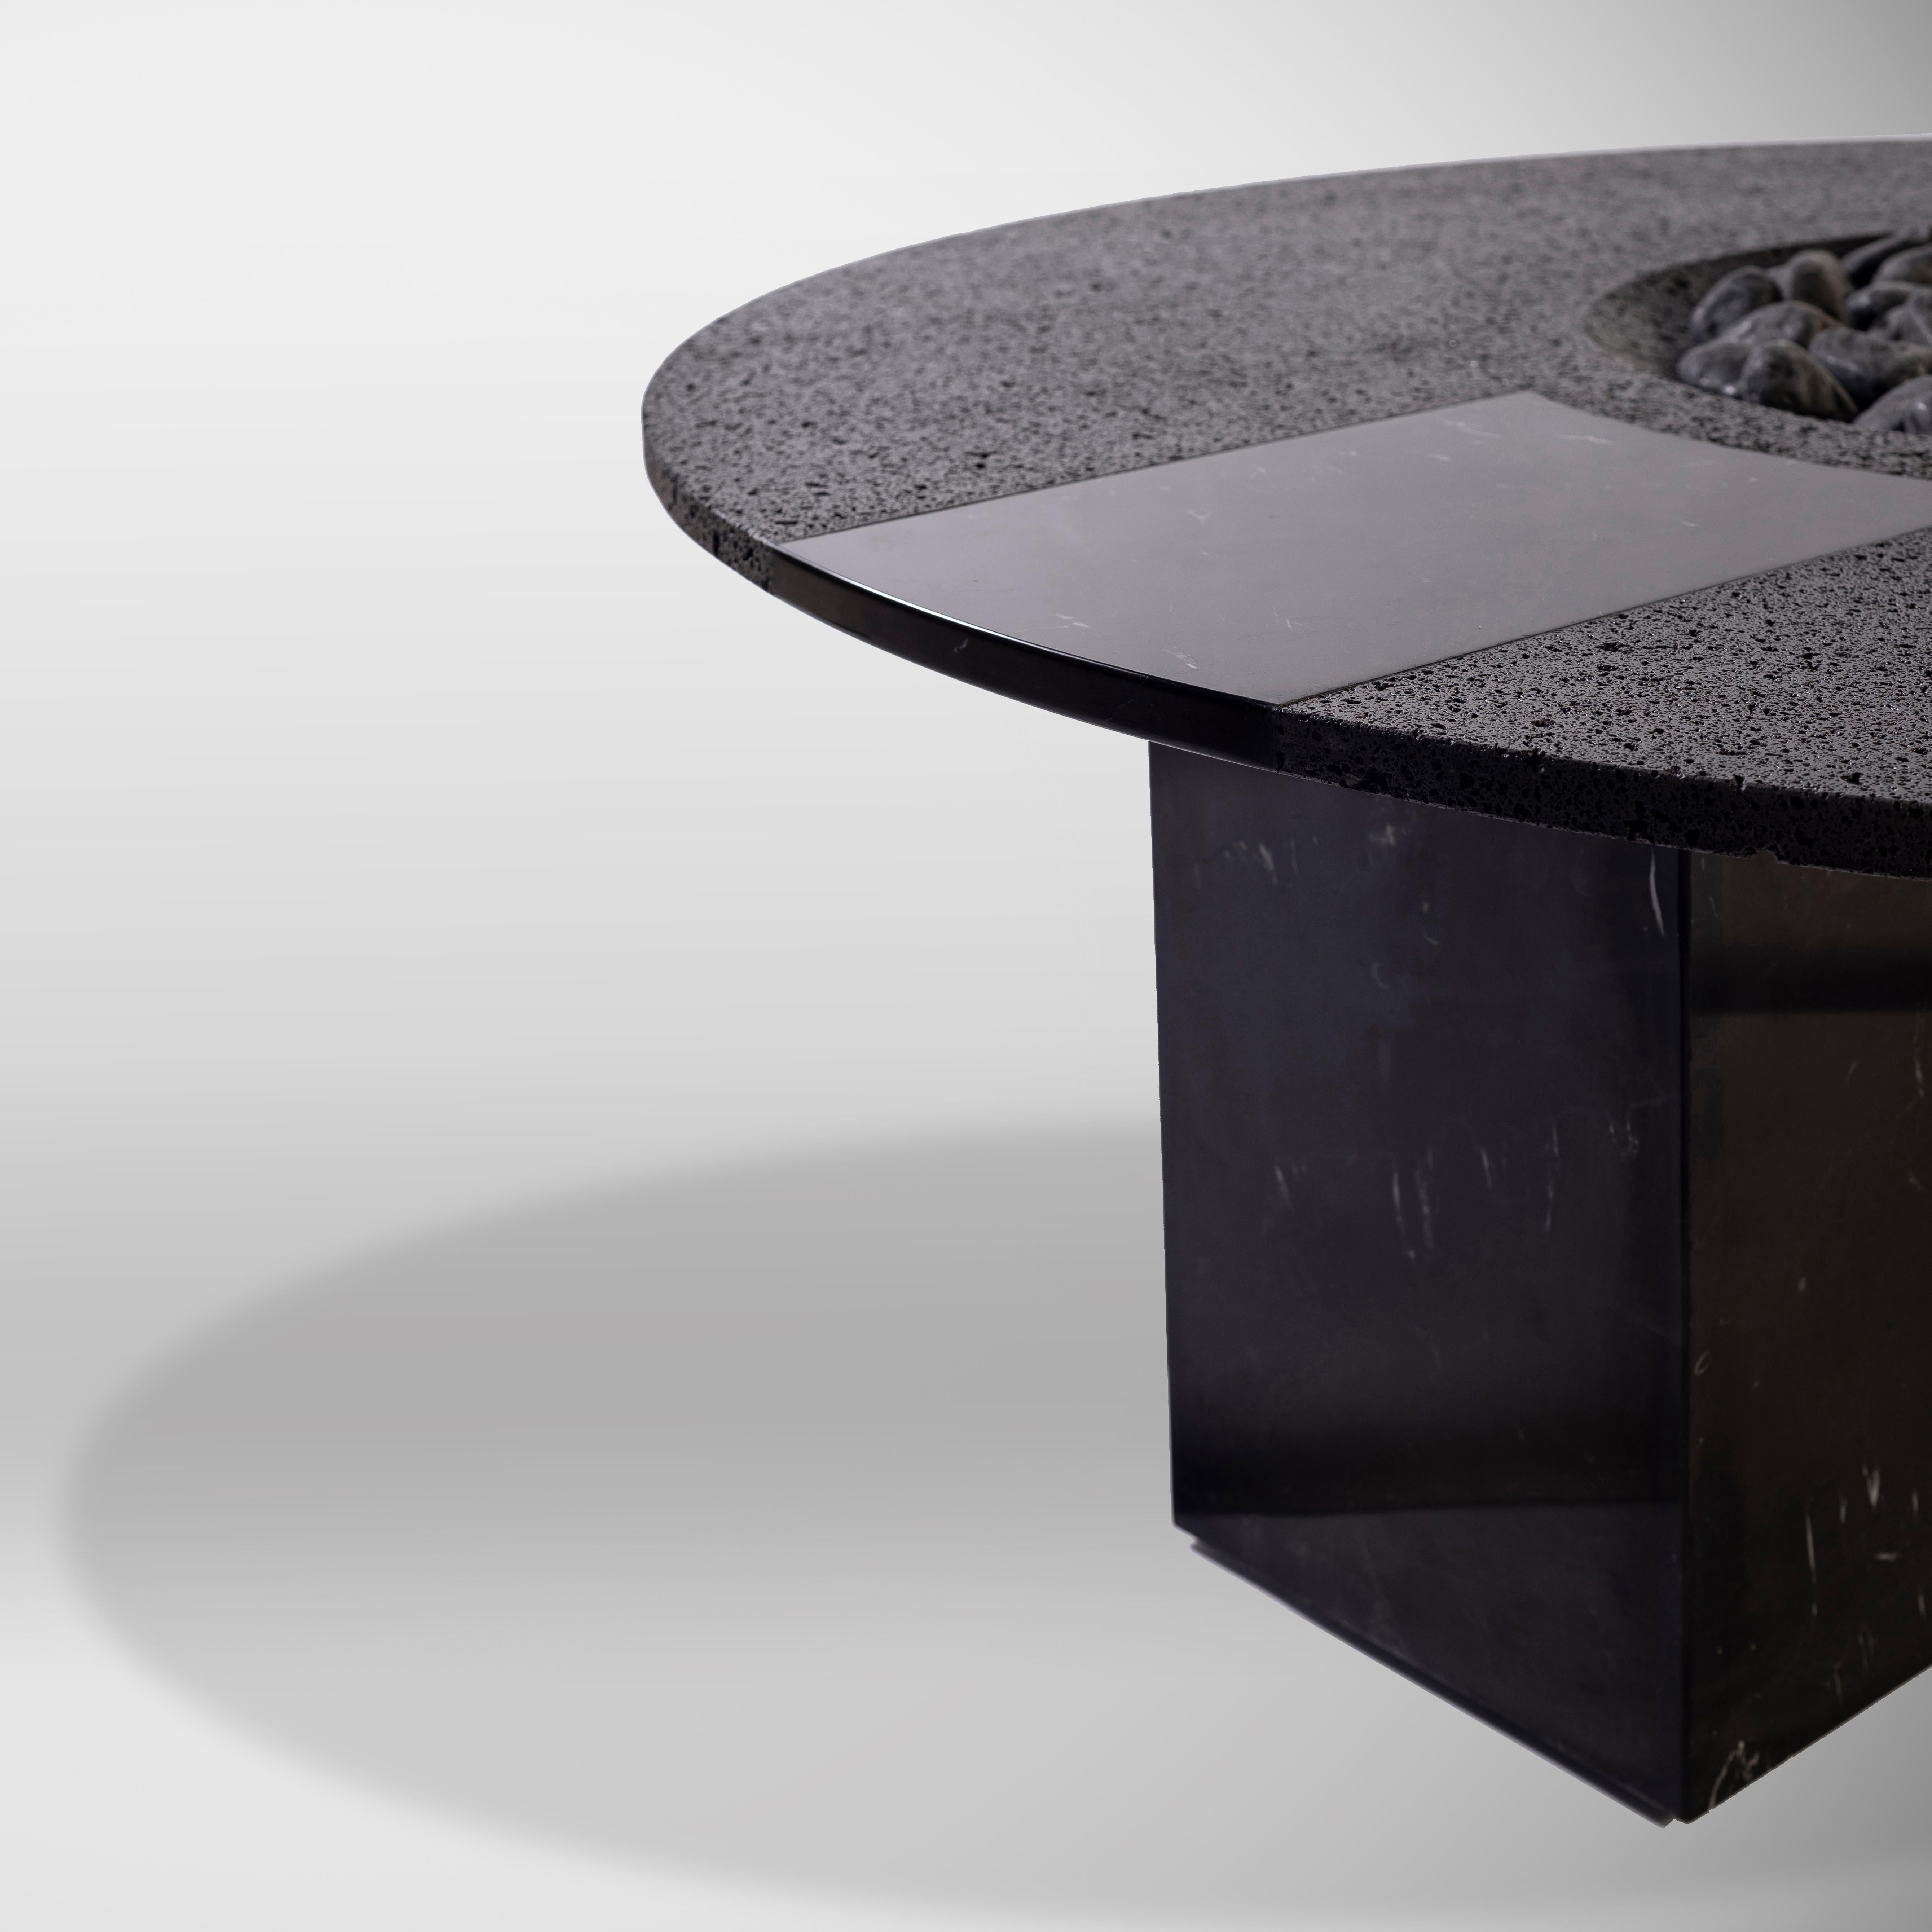 UMO, a volcanic stone fire pit/sculpture created by expert craftspeople, armed by chisel and hammer, chipping away to create symmetry, balance, function, and form. Within this formidable monolithic simplicity and polished border highlight, UMO